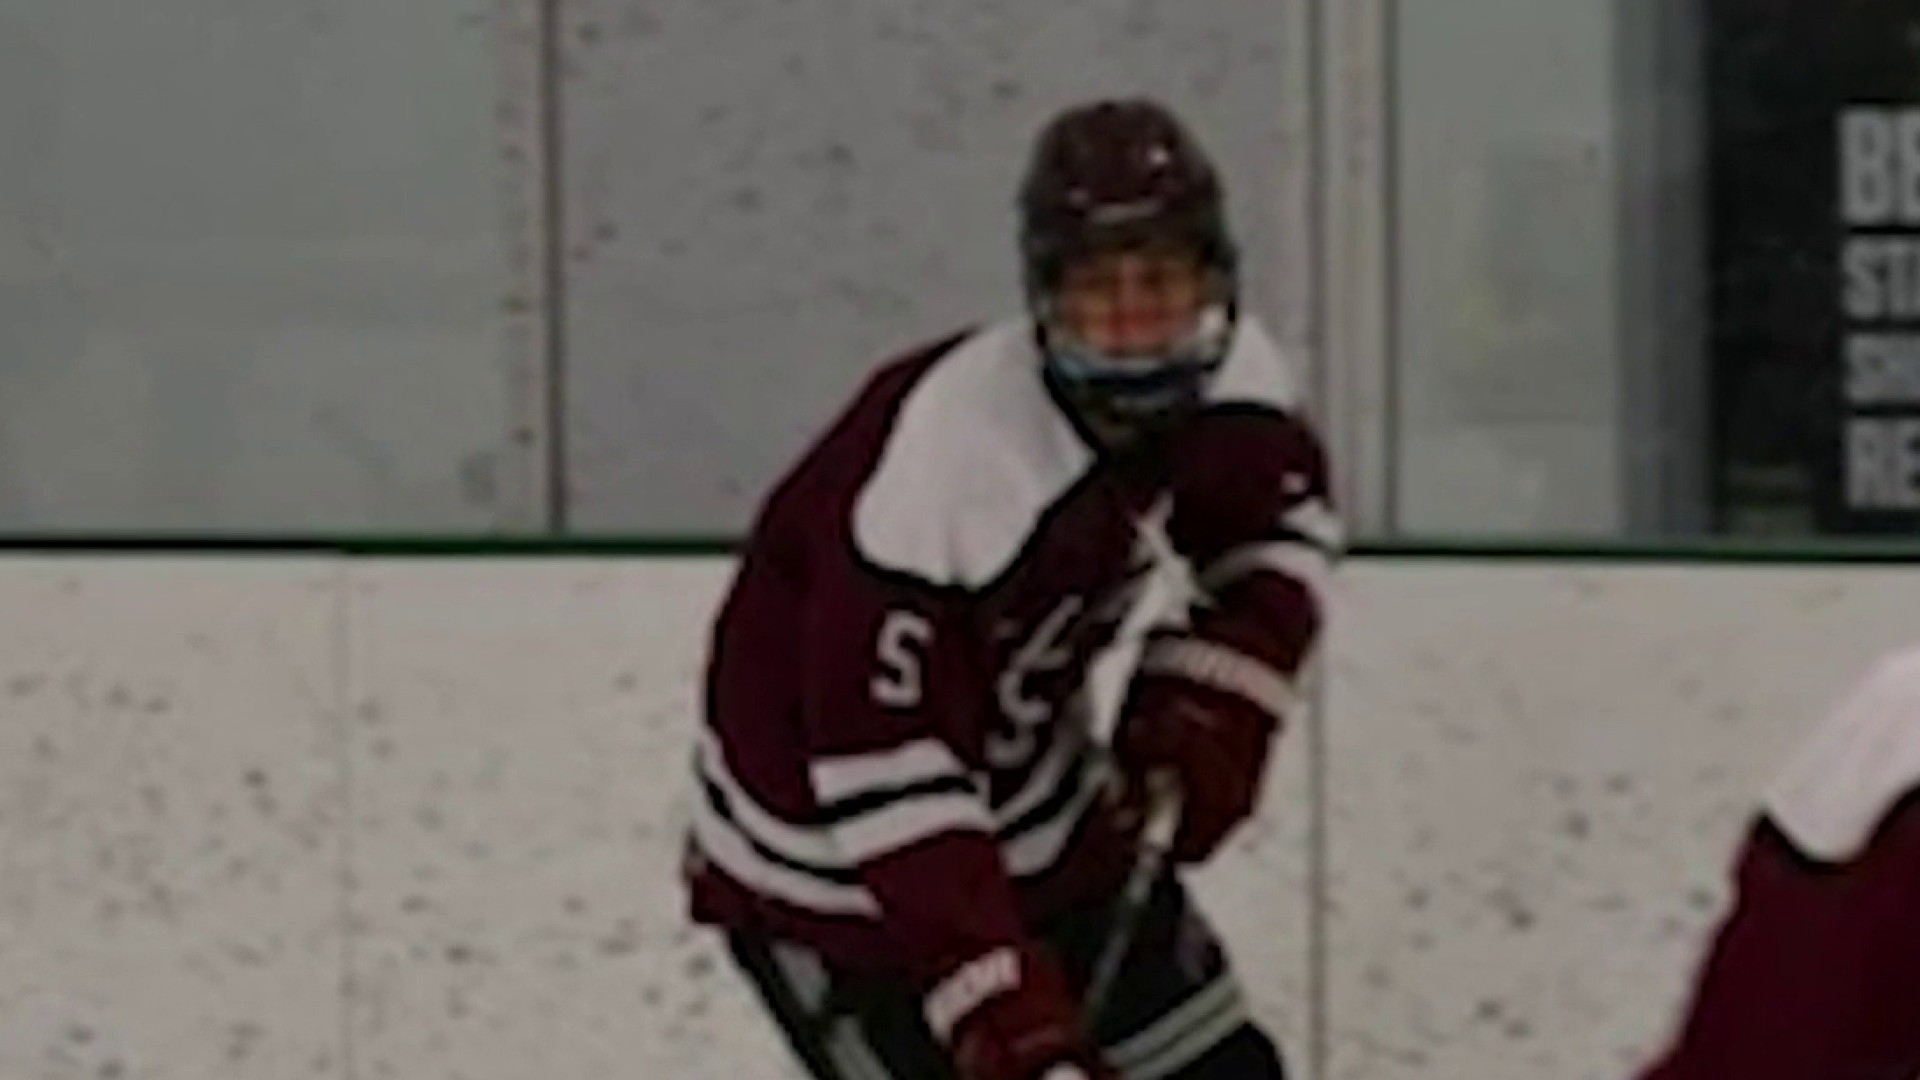 High School Hockey Player Dies in Tragic Accident During an Away